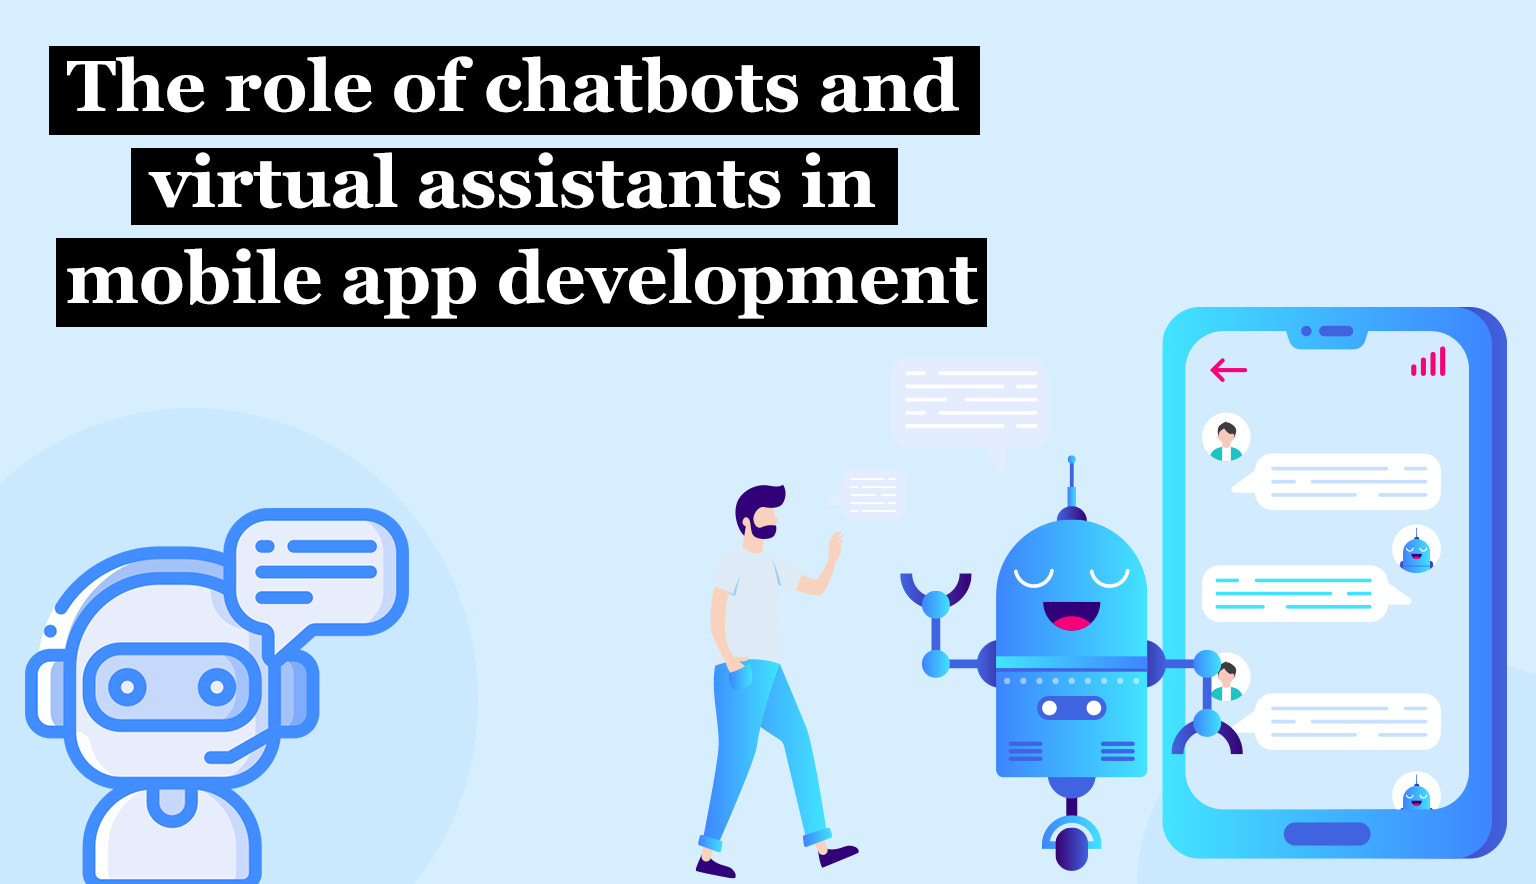 The role of chatbots and virtual assistants in mobile app development